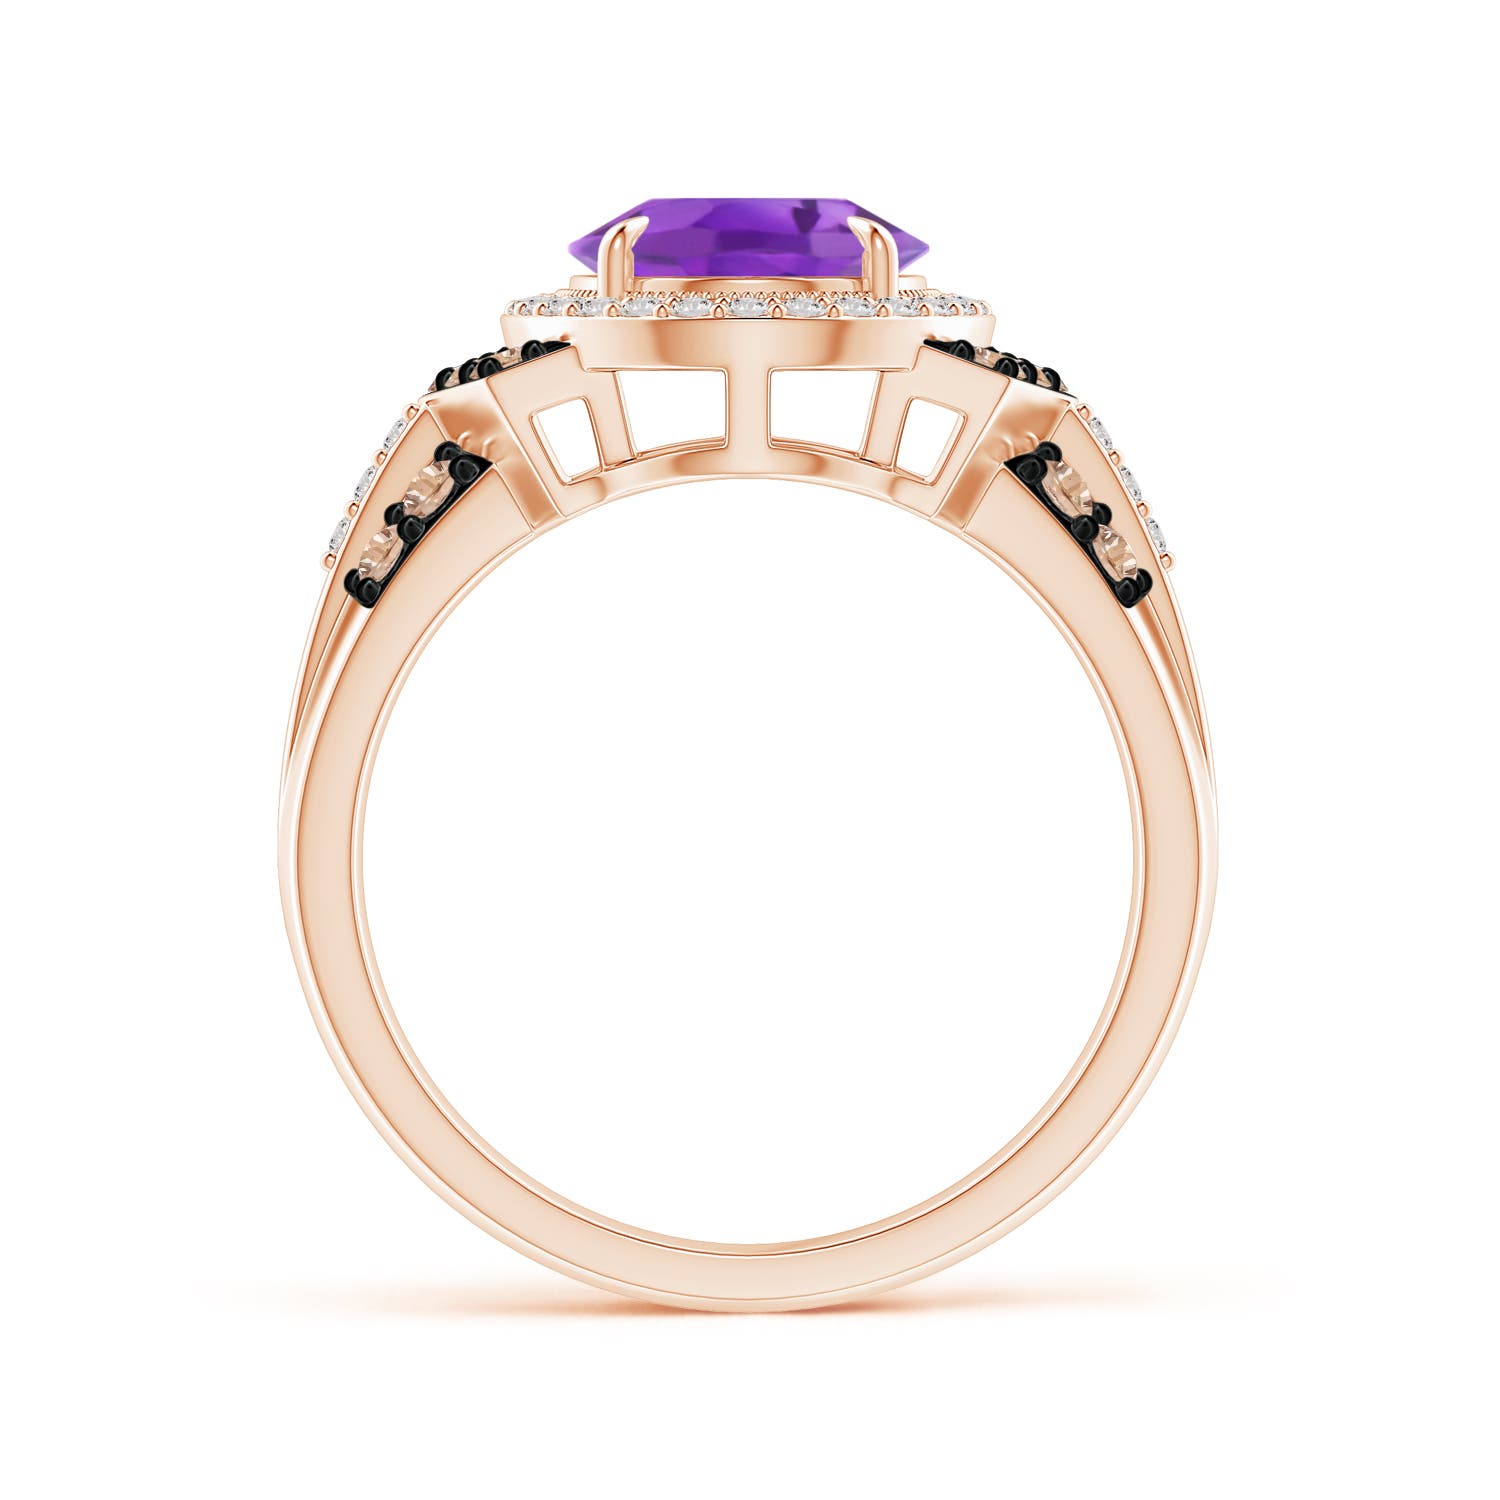 AA - Amethyst / 2.81 CT / 14 KT Rose Gold